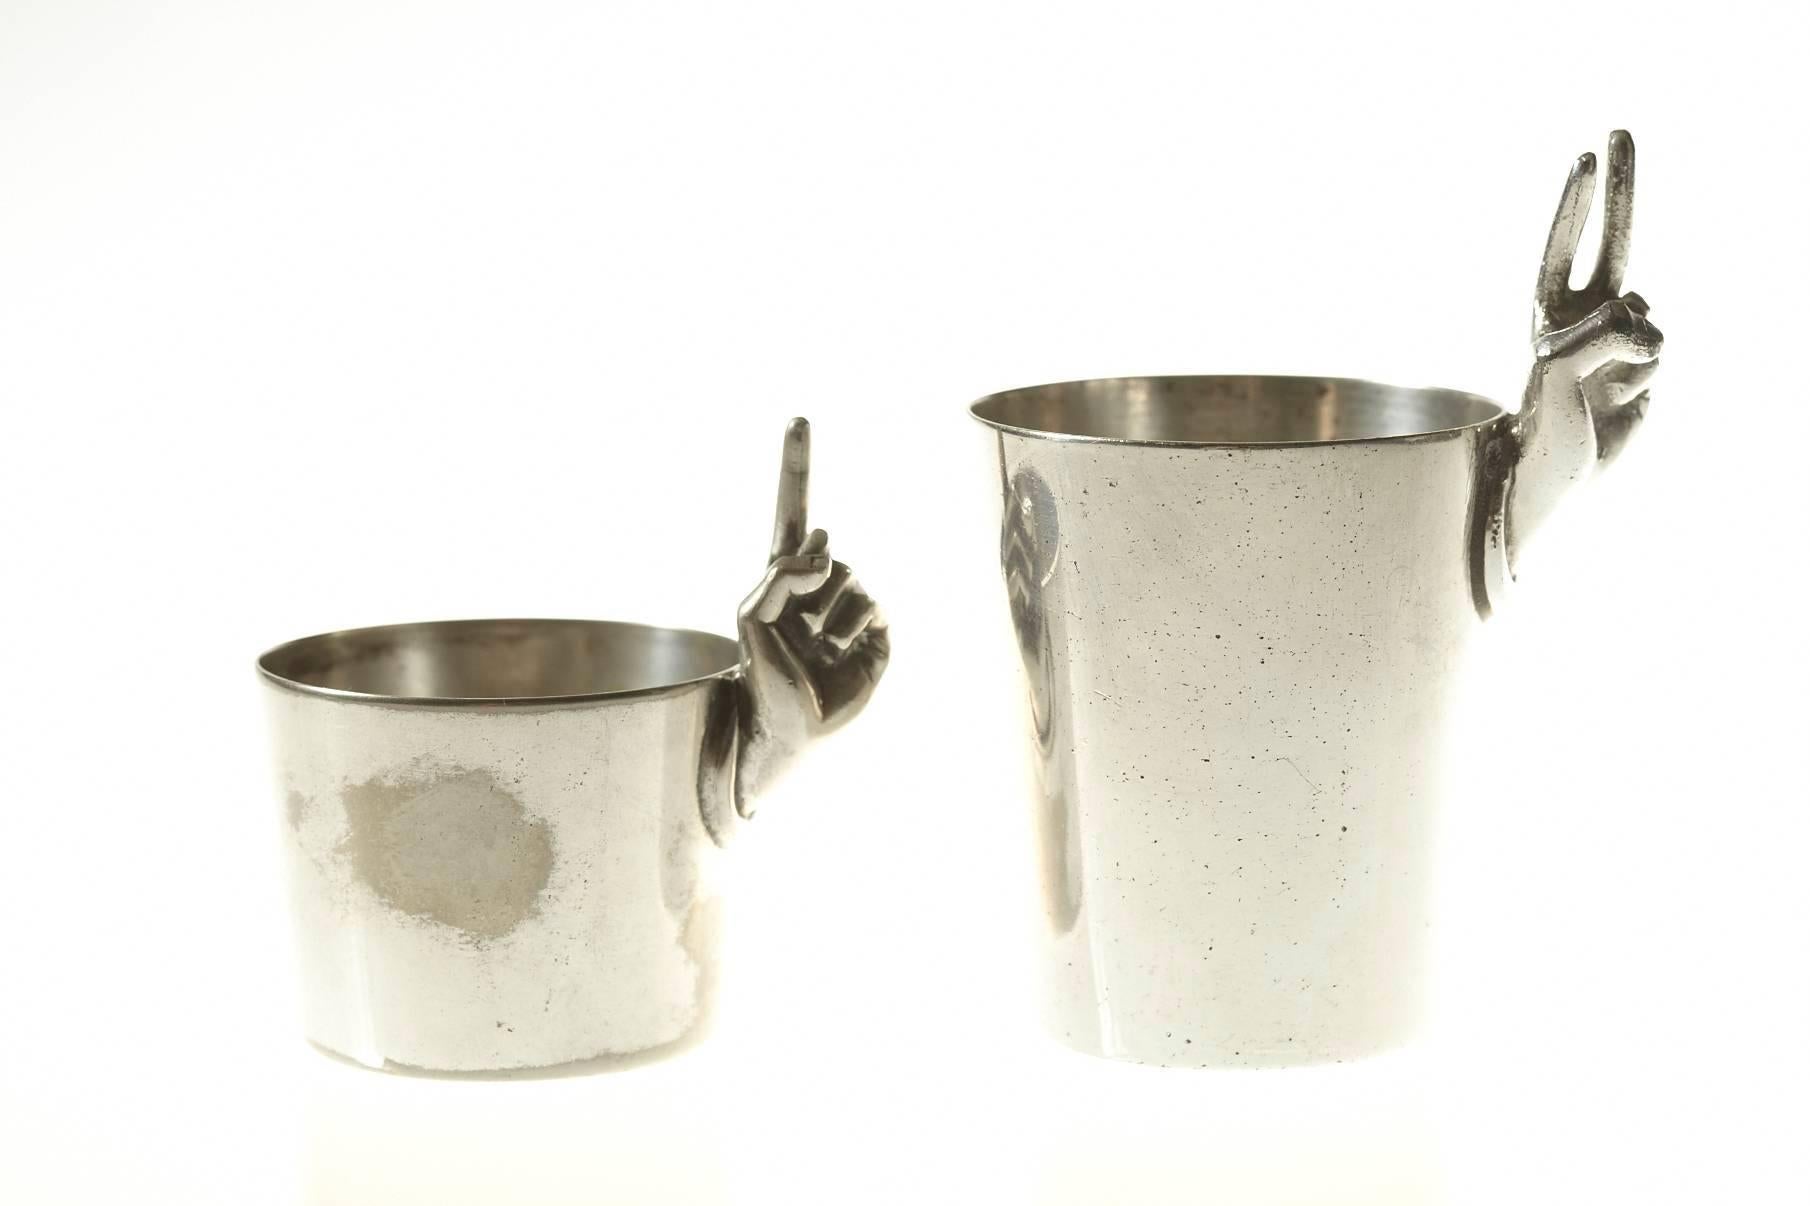 Nice vintage pair of silver plated Napier figural one (2oz) and two (40z) finger shot glasses or measuring cups.
Vintage condition, please refer to photos as they are part of the description.
Dimensions: 
small 2oz cup - diameter 1.5